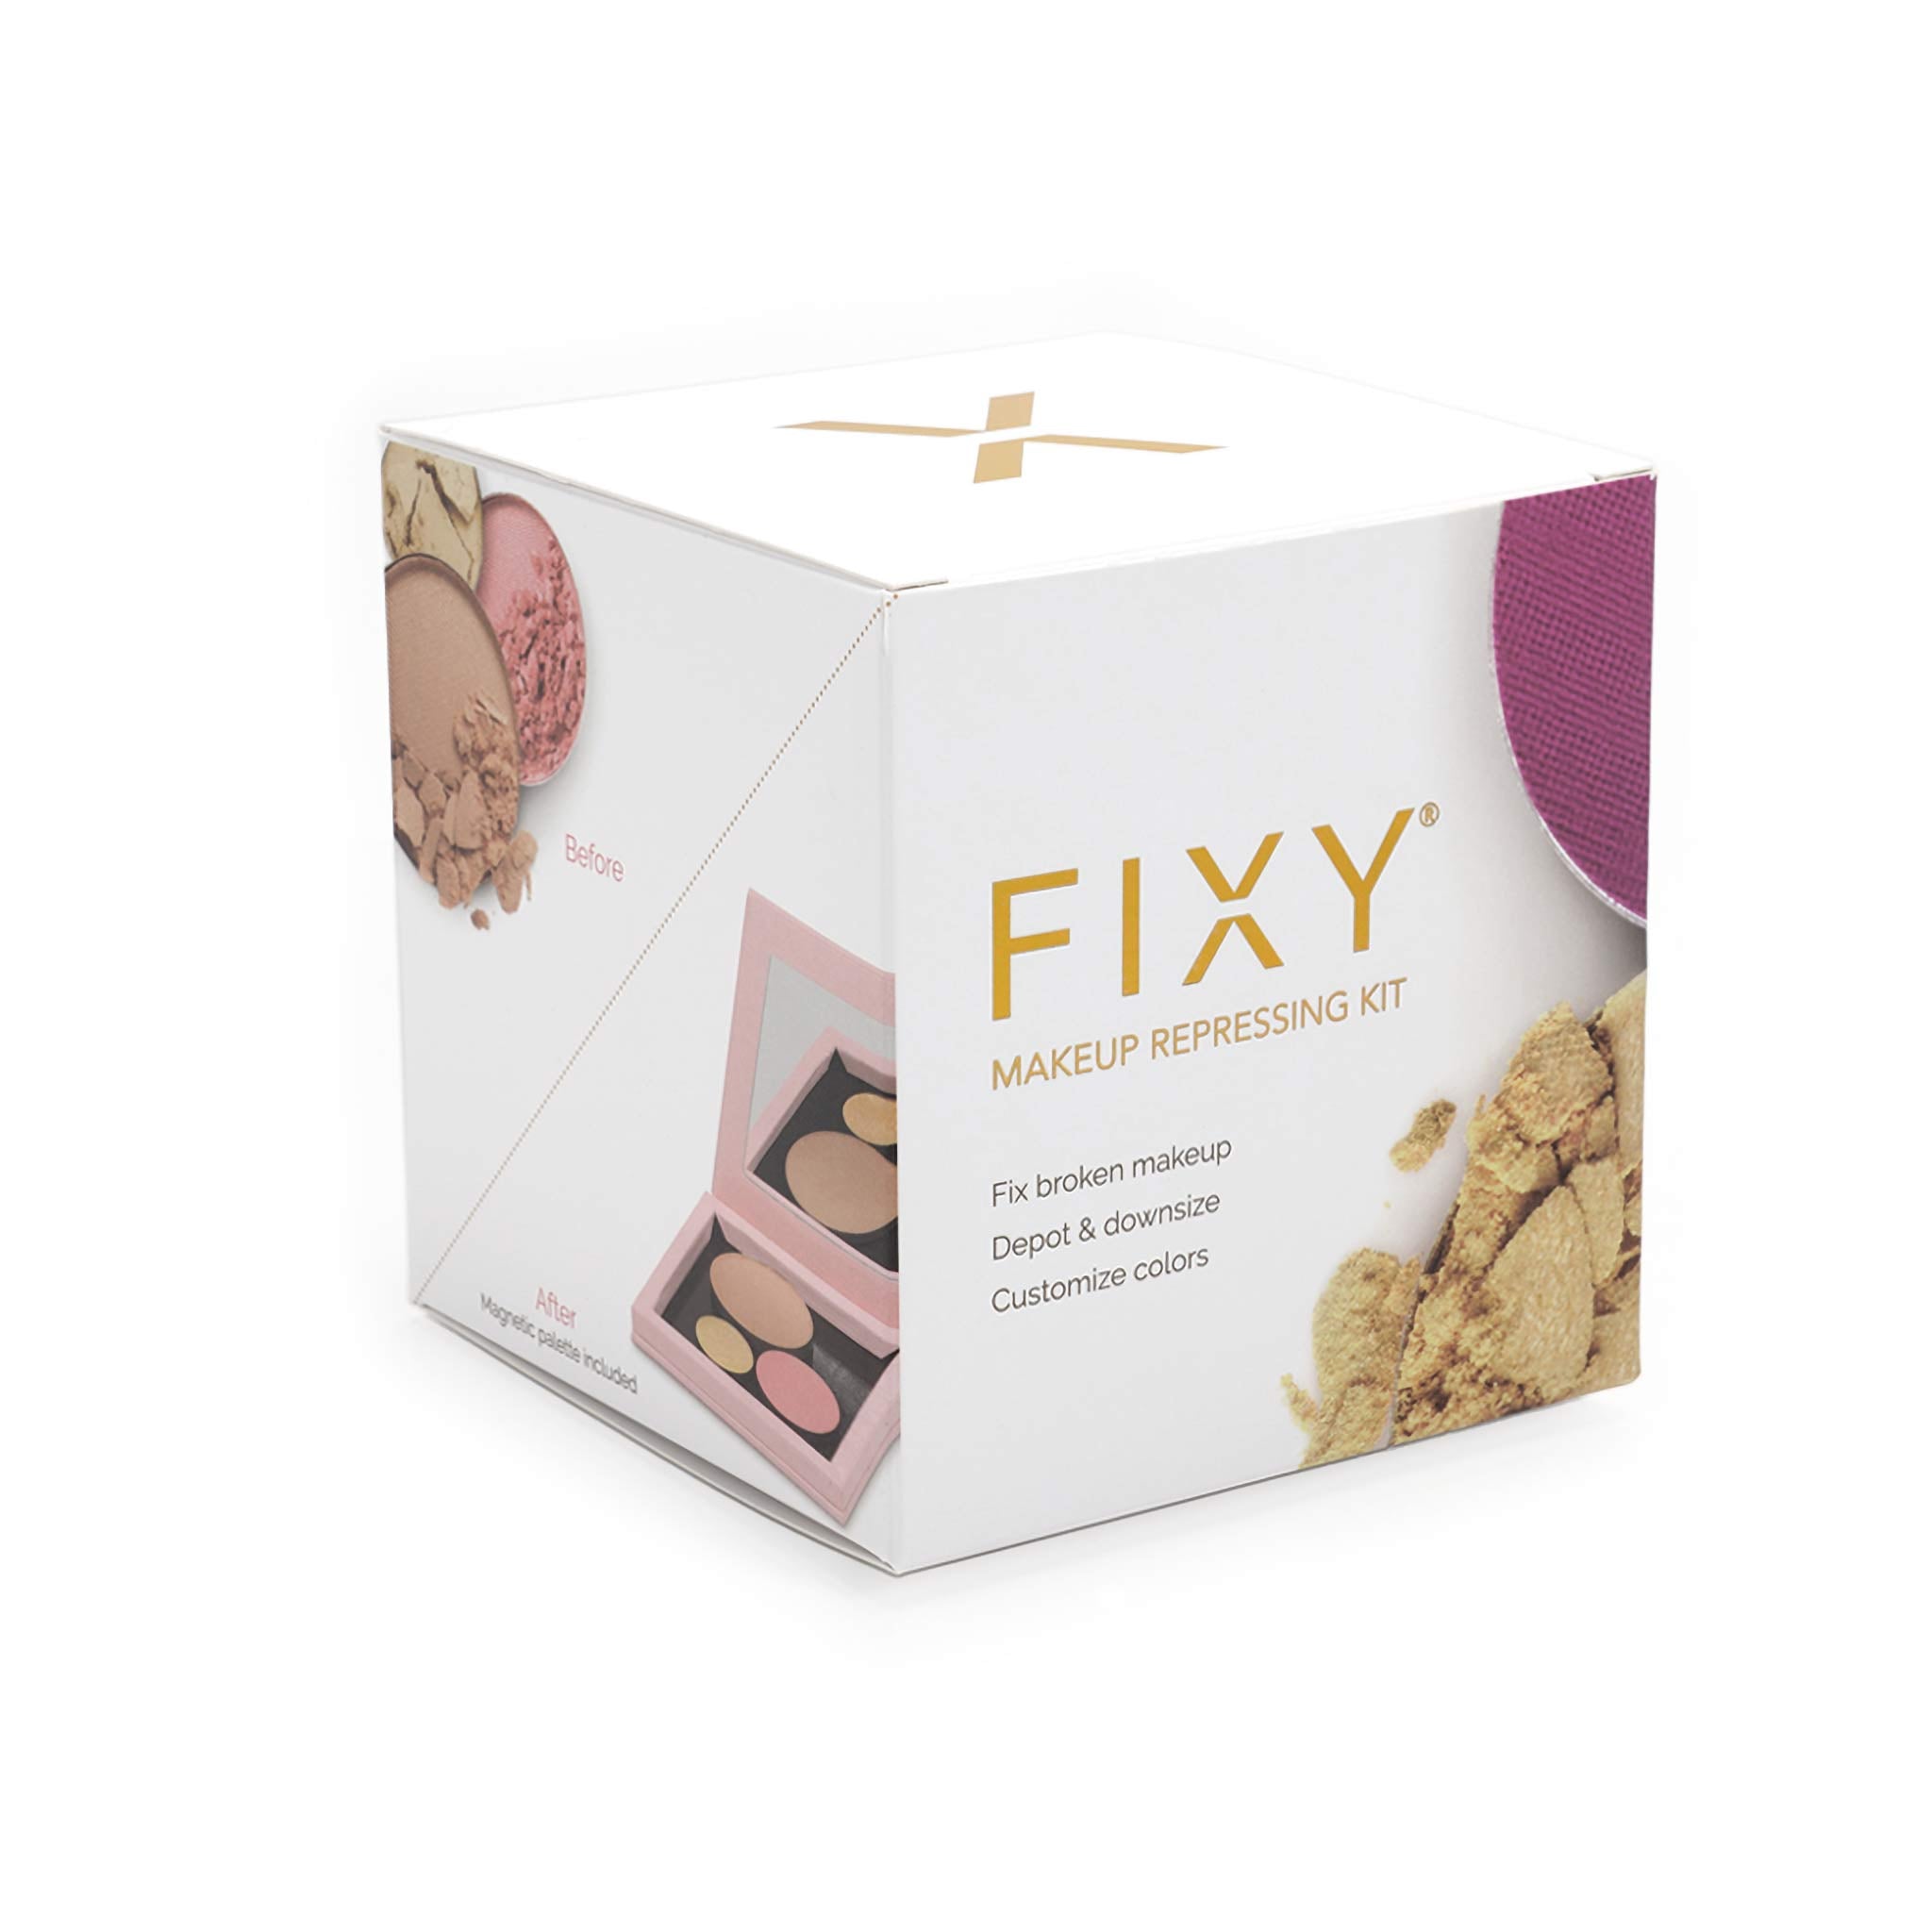 Packaging box of FIXY Makeup Repressing Kit Circle Pans with features listed: &#39;Fix broken makeup, Depot &amp; downsize, Customize colors&#39;. Visible on the box is a preview window showing the kit inside with crushed makeup powders, indicating the repair process.